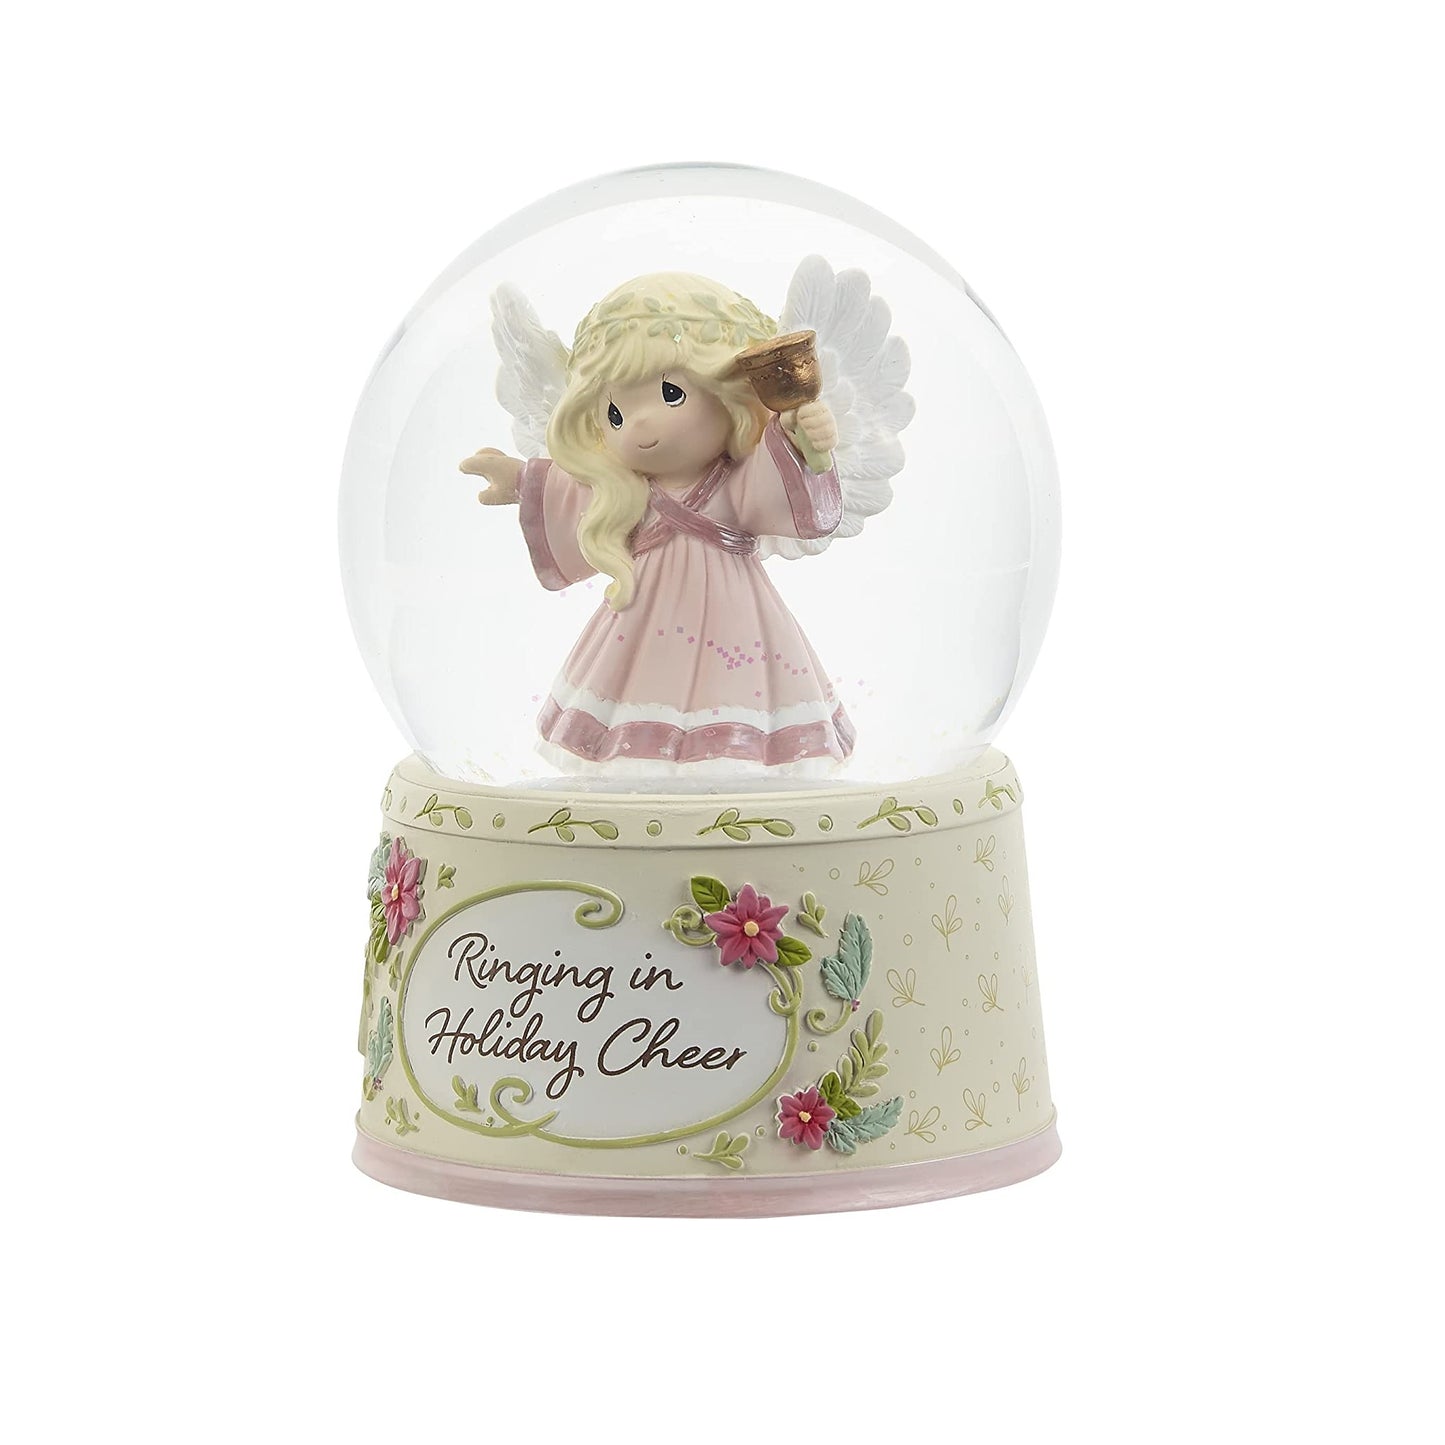 Ringing In Holiday Cheer Annual Angel Musical Snow Globe